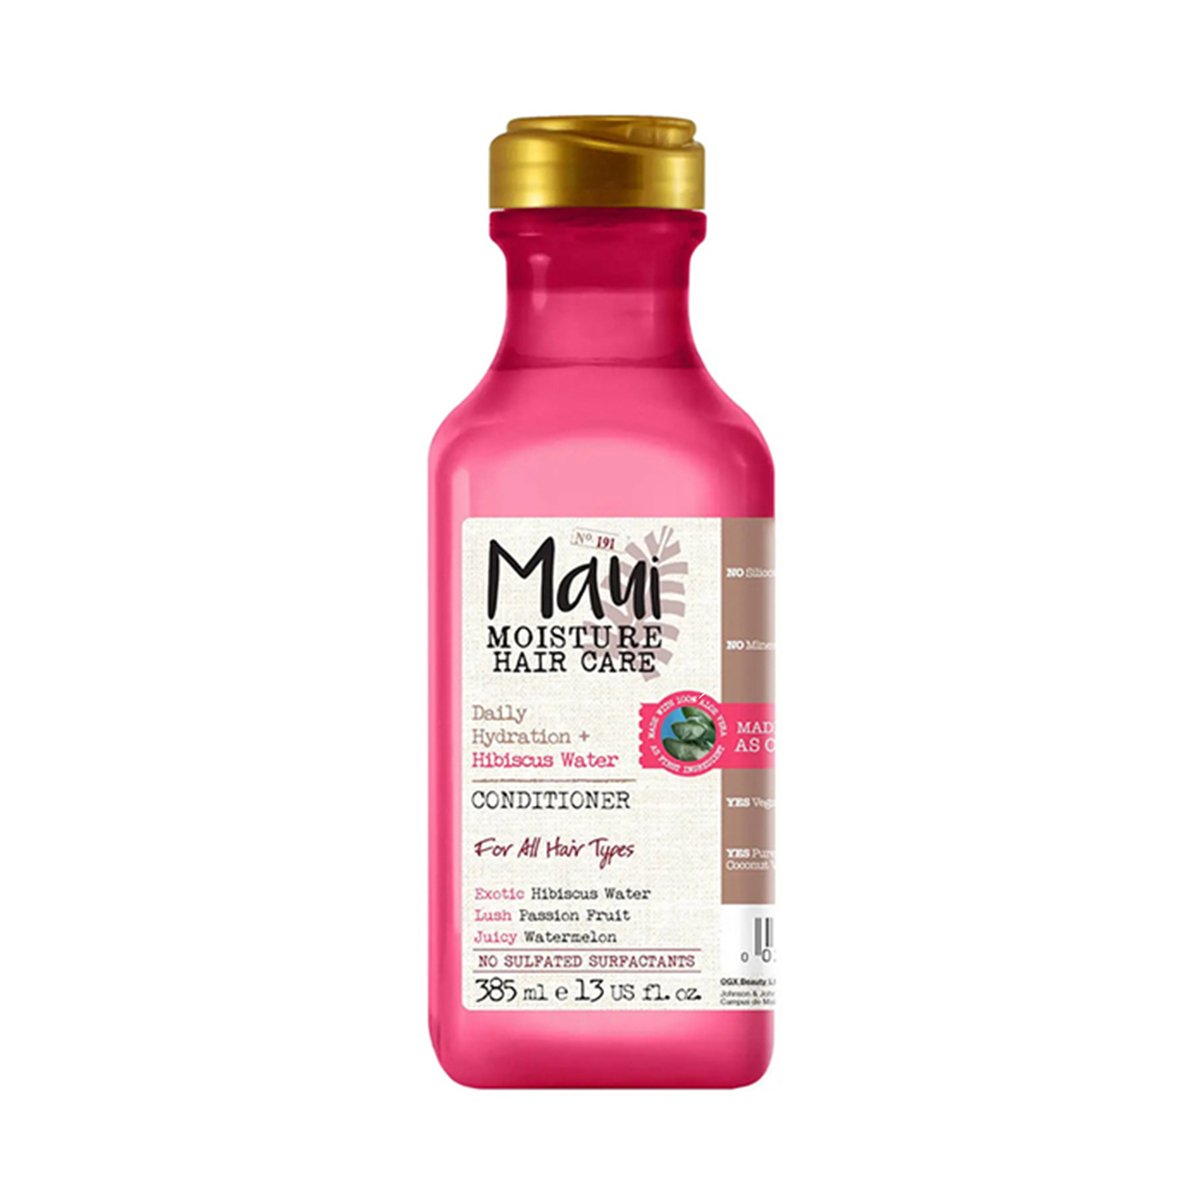 Maui Moisture Hair Care Hibiscus Water Conditioner 385 ml